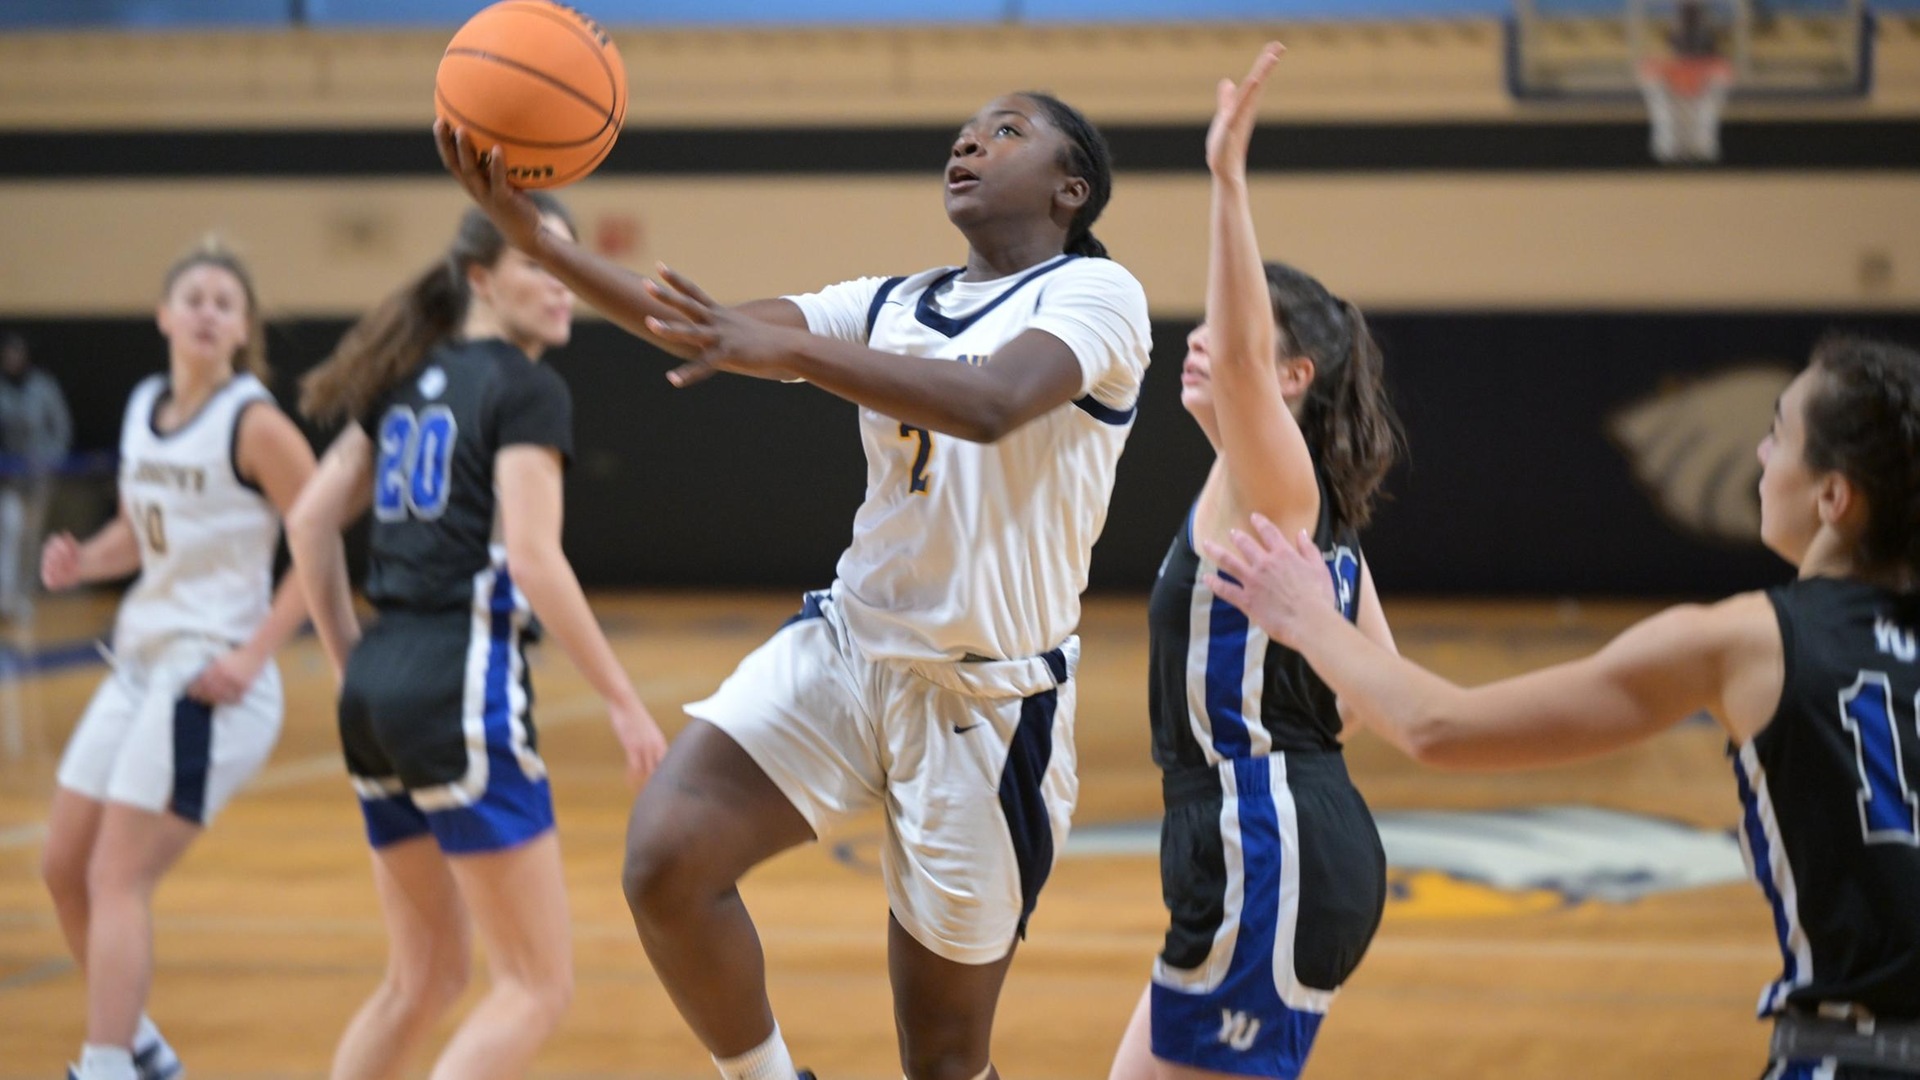 Women's Basketball Claims Victory in Season Opener Over SUNY Geneseo, 62-47